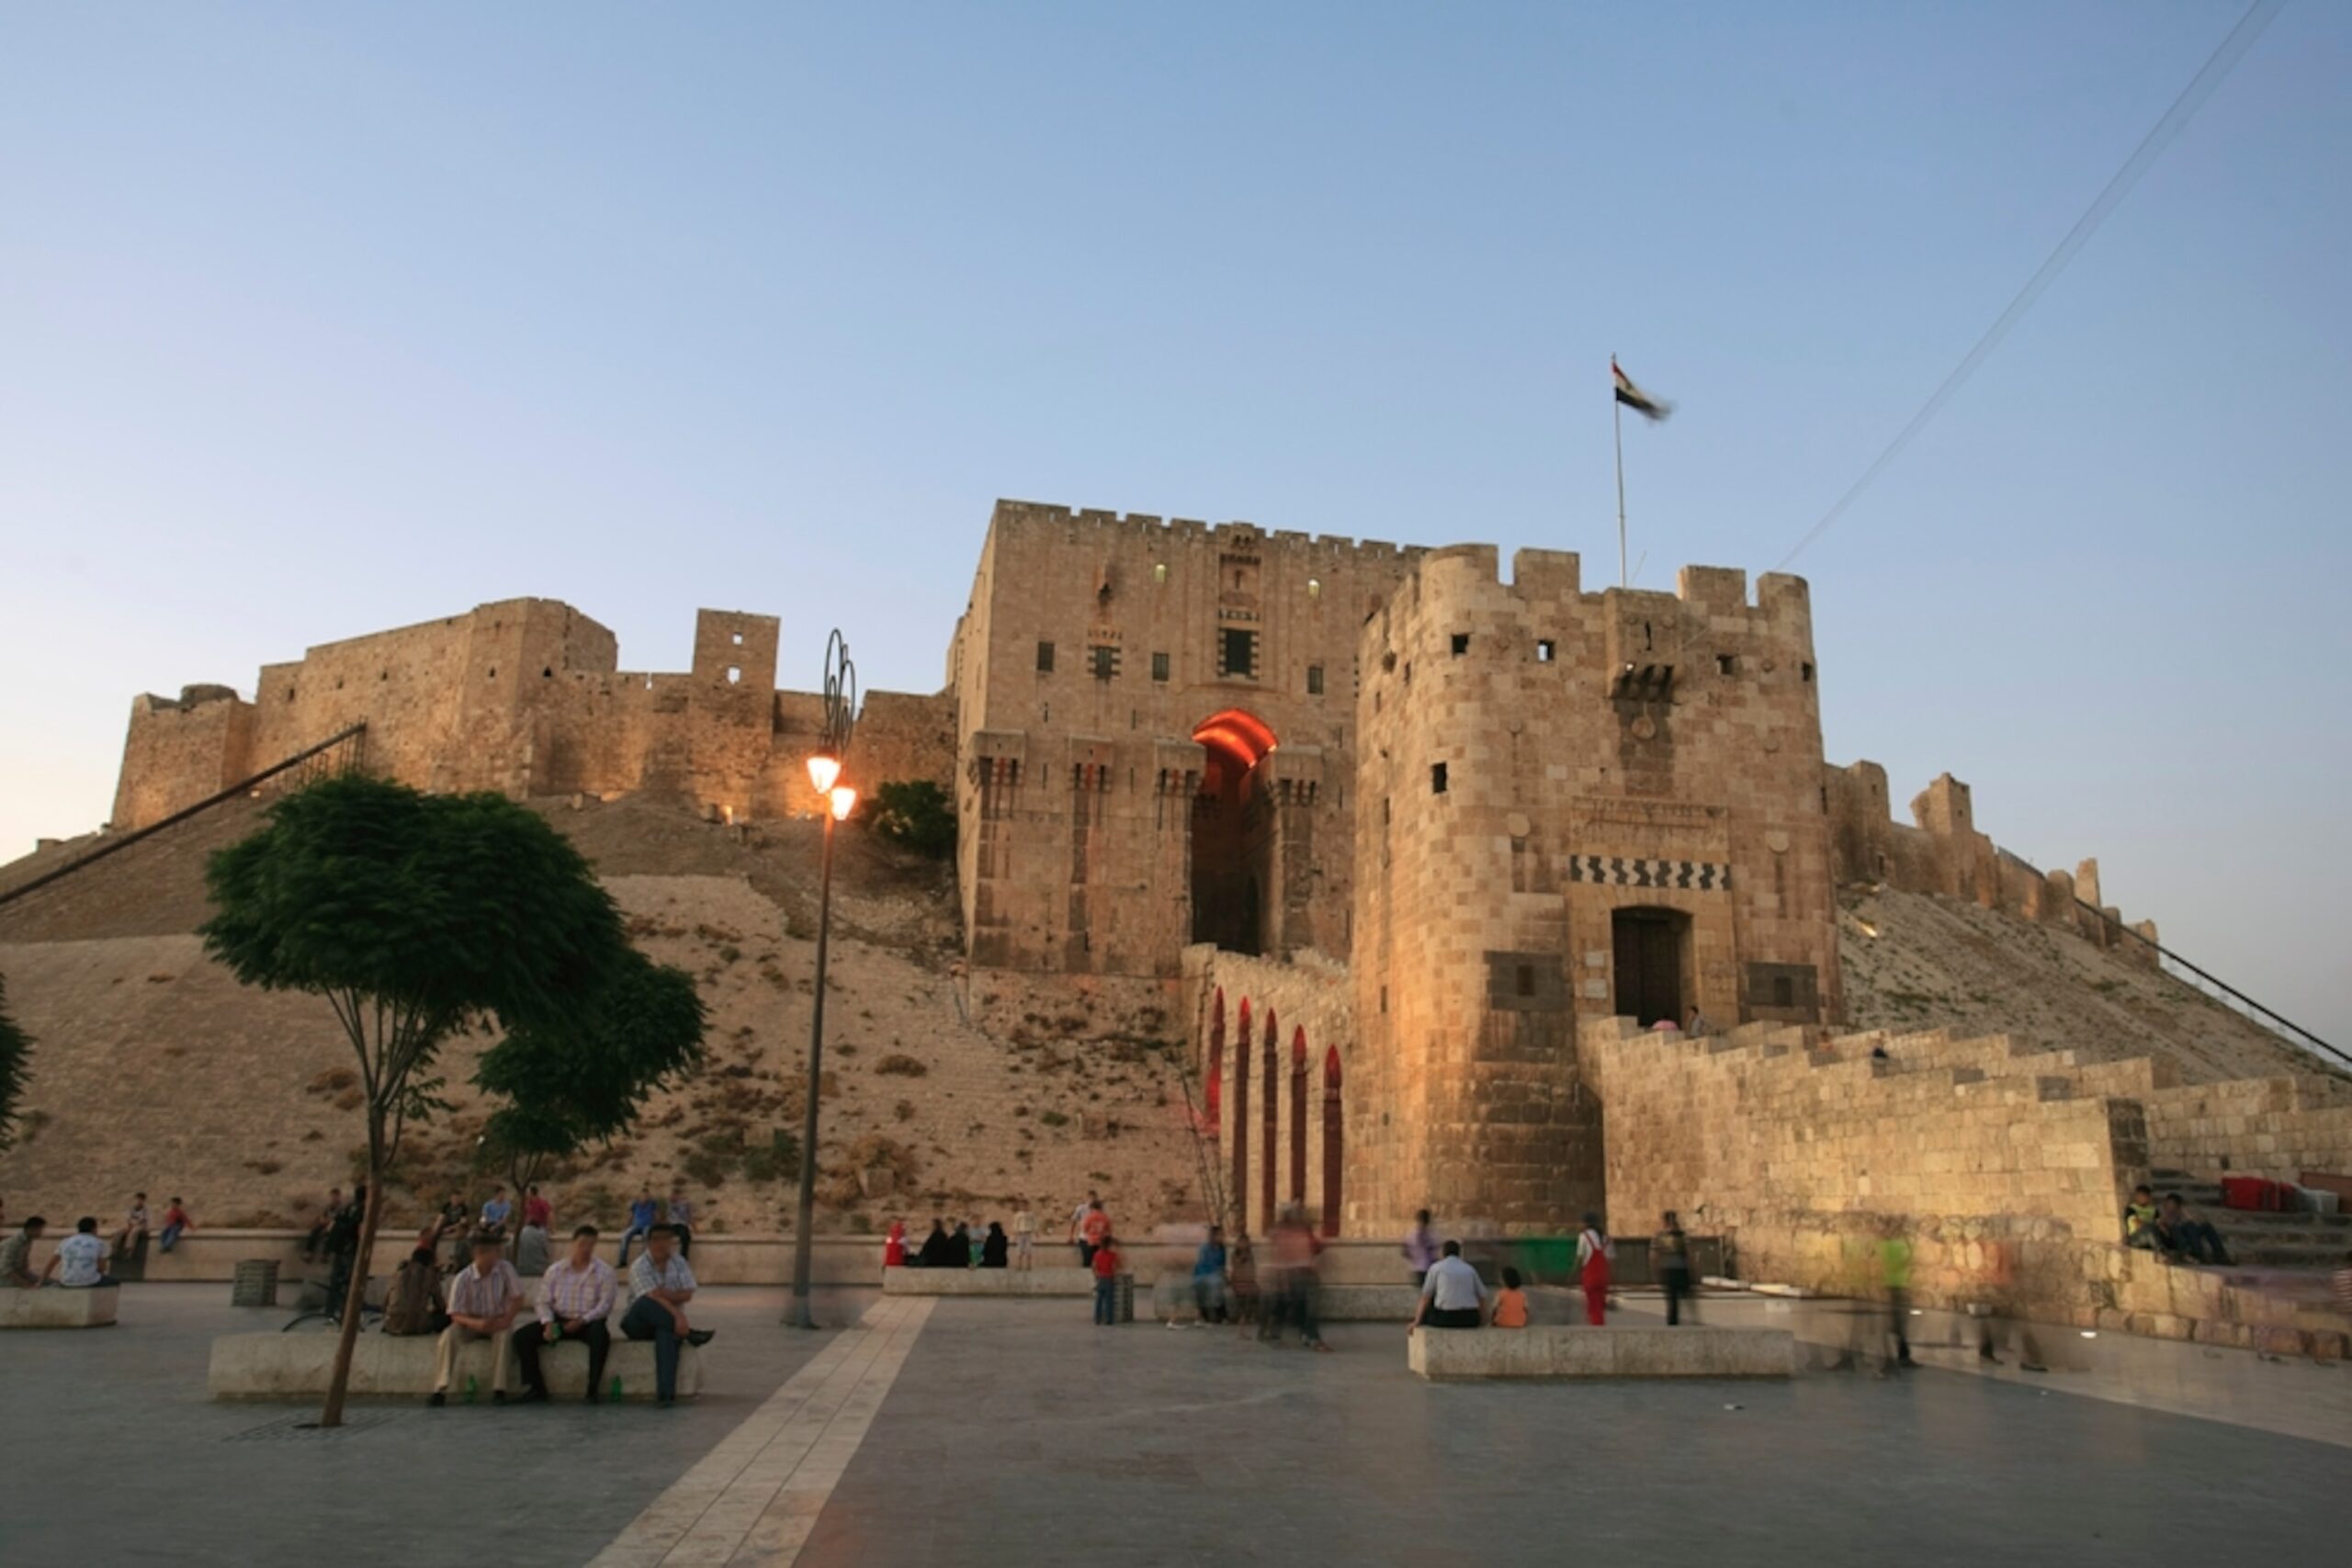 Ottoman Legacy - Aleppo's Fortifications and Defensive Structures